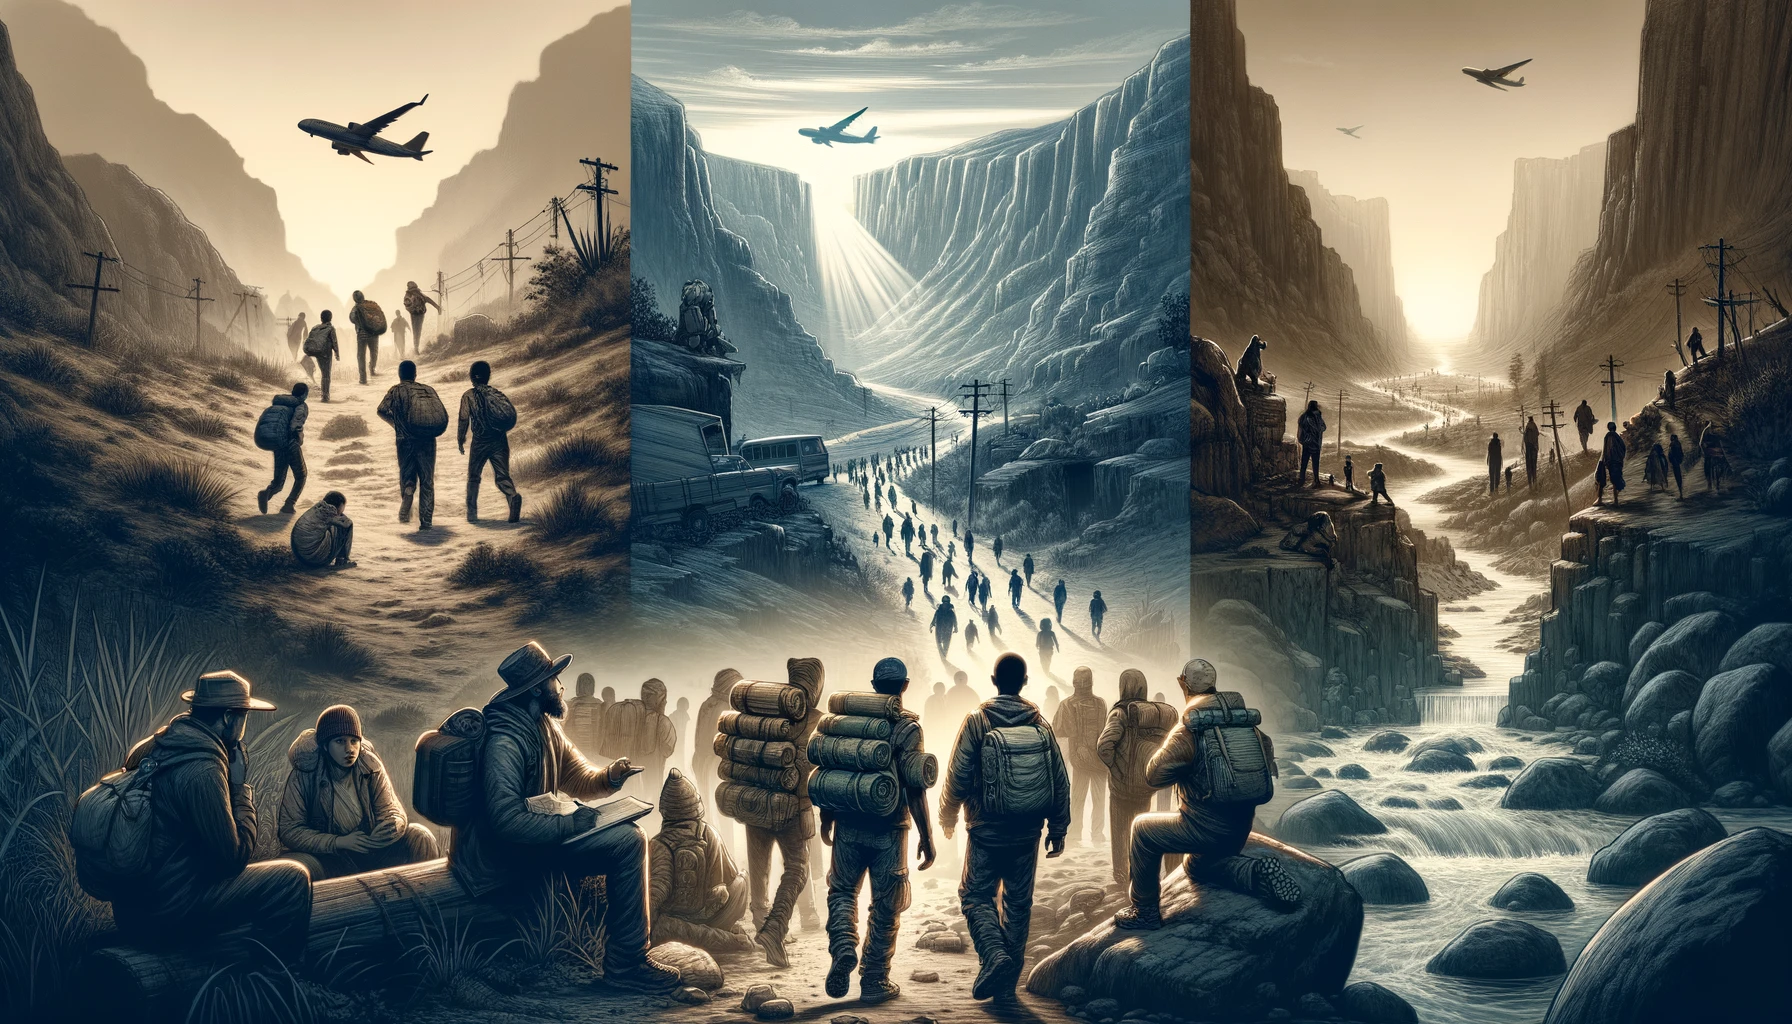 An illustrative contrast between the perilous, shadowed paths of illegal Dunki immigration and the bright, secure road of legal immigration, leading towards a hopeful horizon. The image symbolizes the journey towards a new beginning, underscored by the safety and dignity of following legal procedures, inspired by the principles of Nirman's Law.